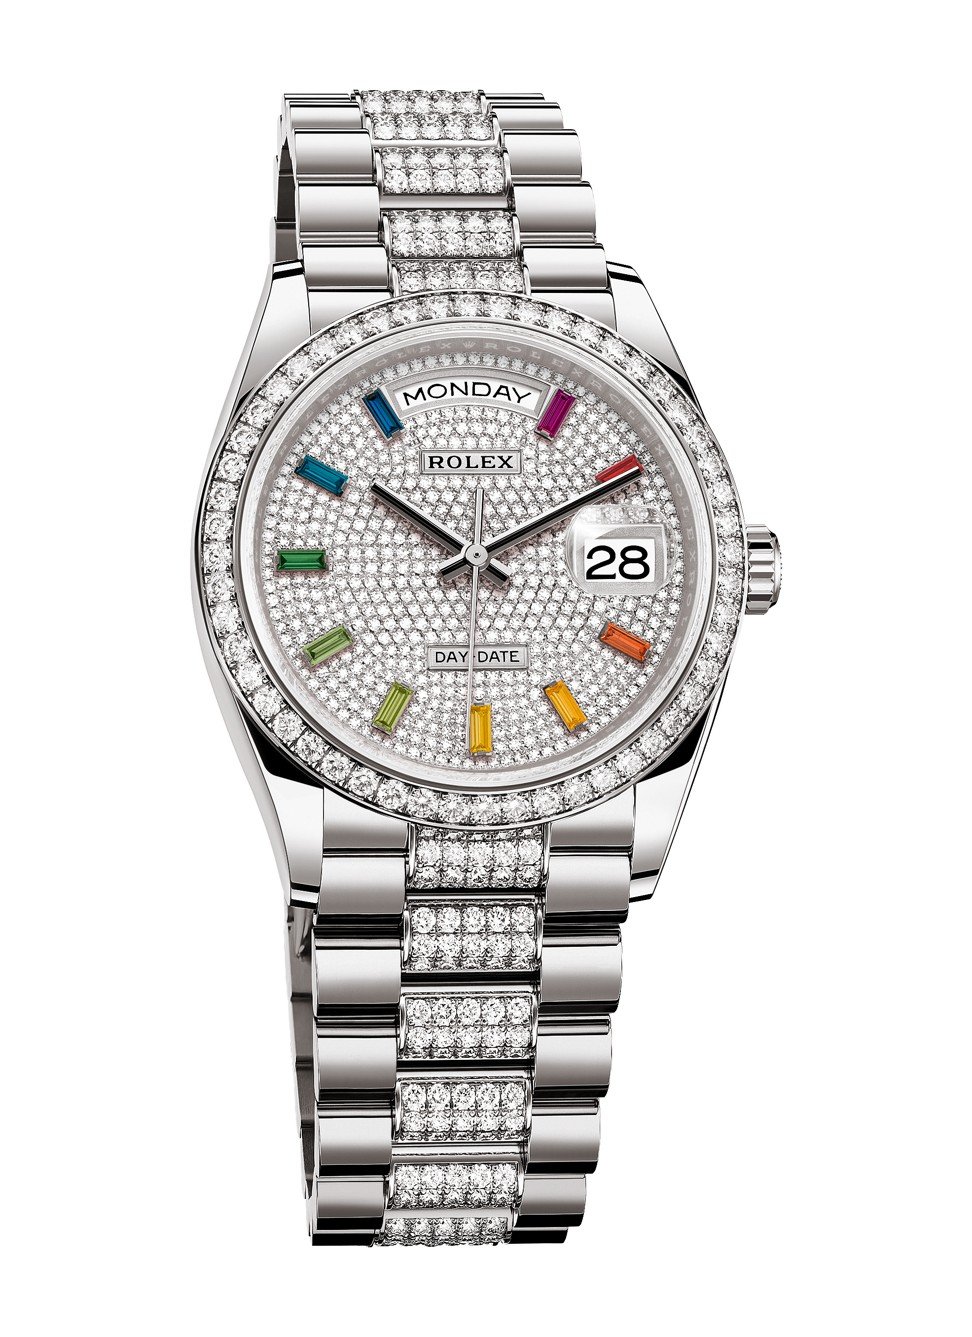 Rolex Oyster Perpetual Day-Date 36 with coloured gem hour markers.